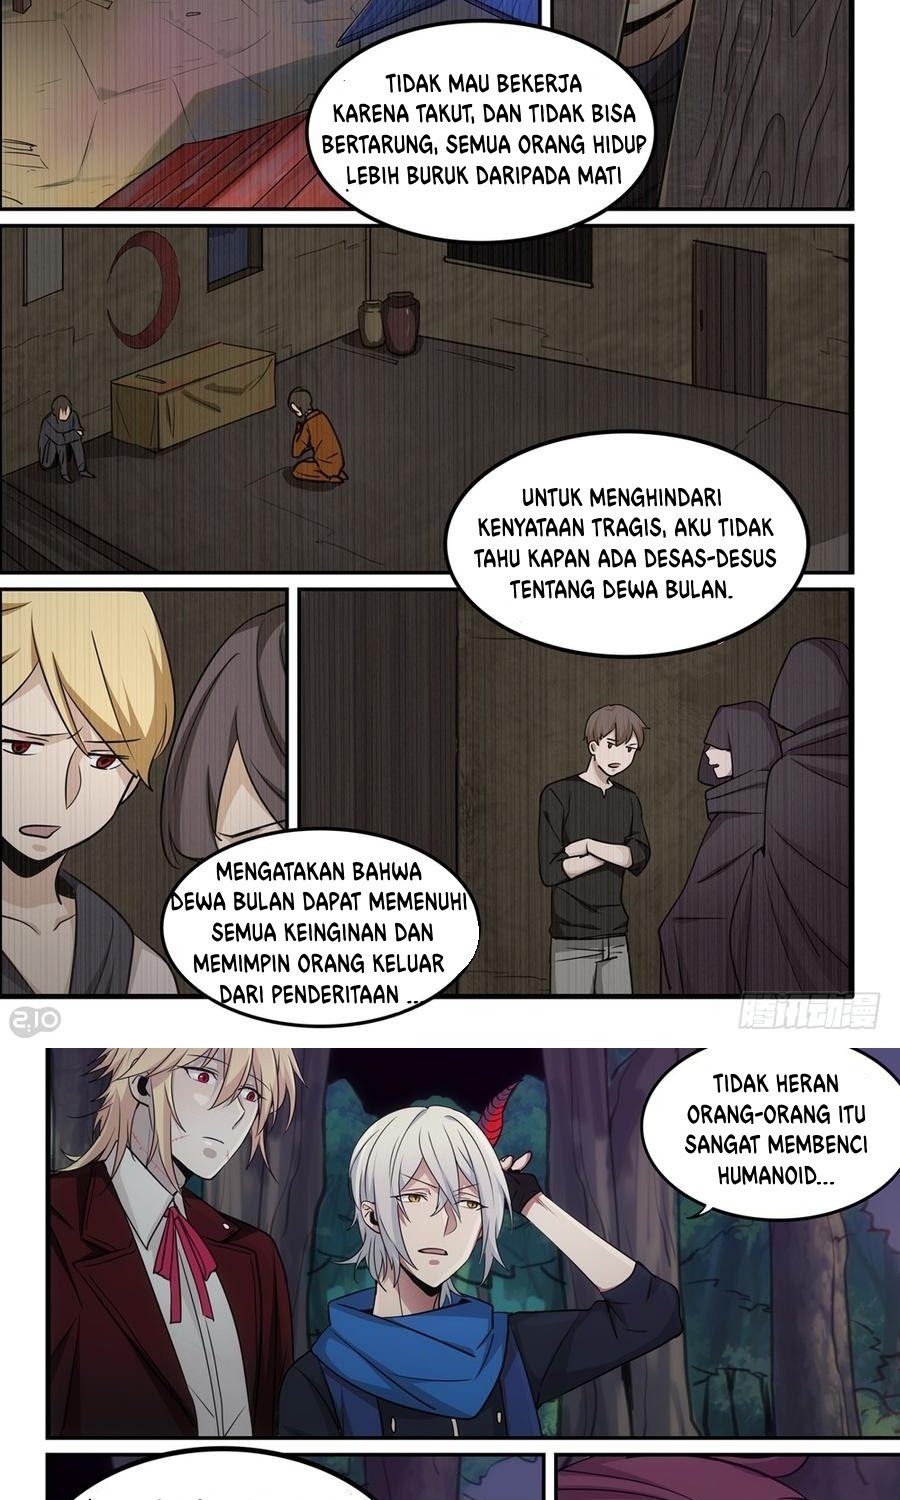 The Reborn Chapter 39